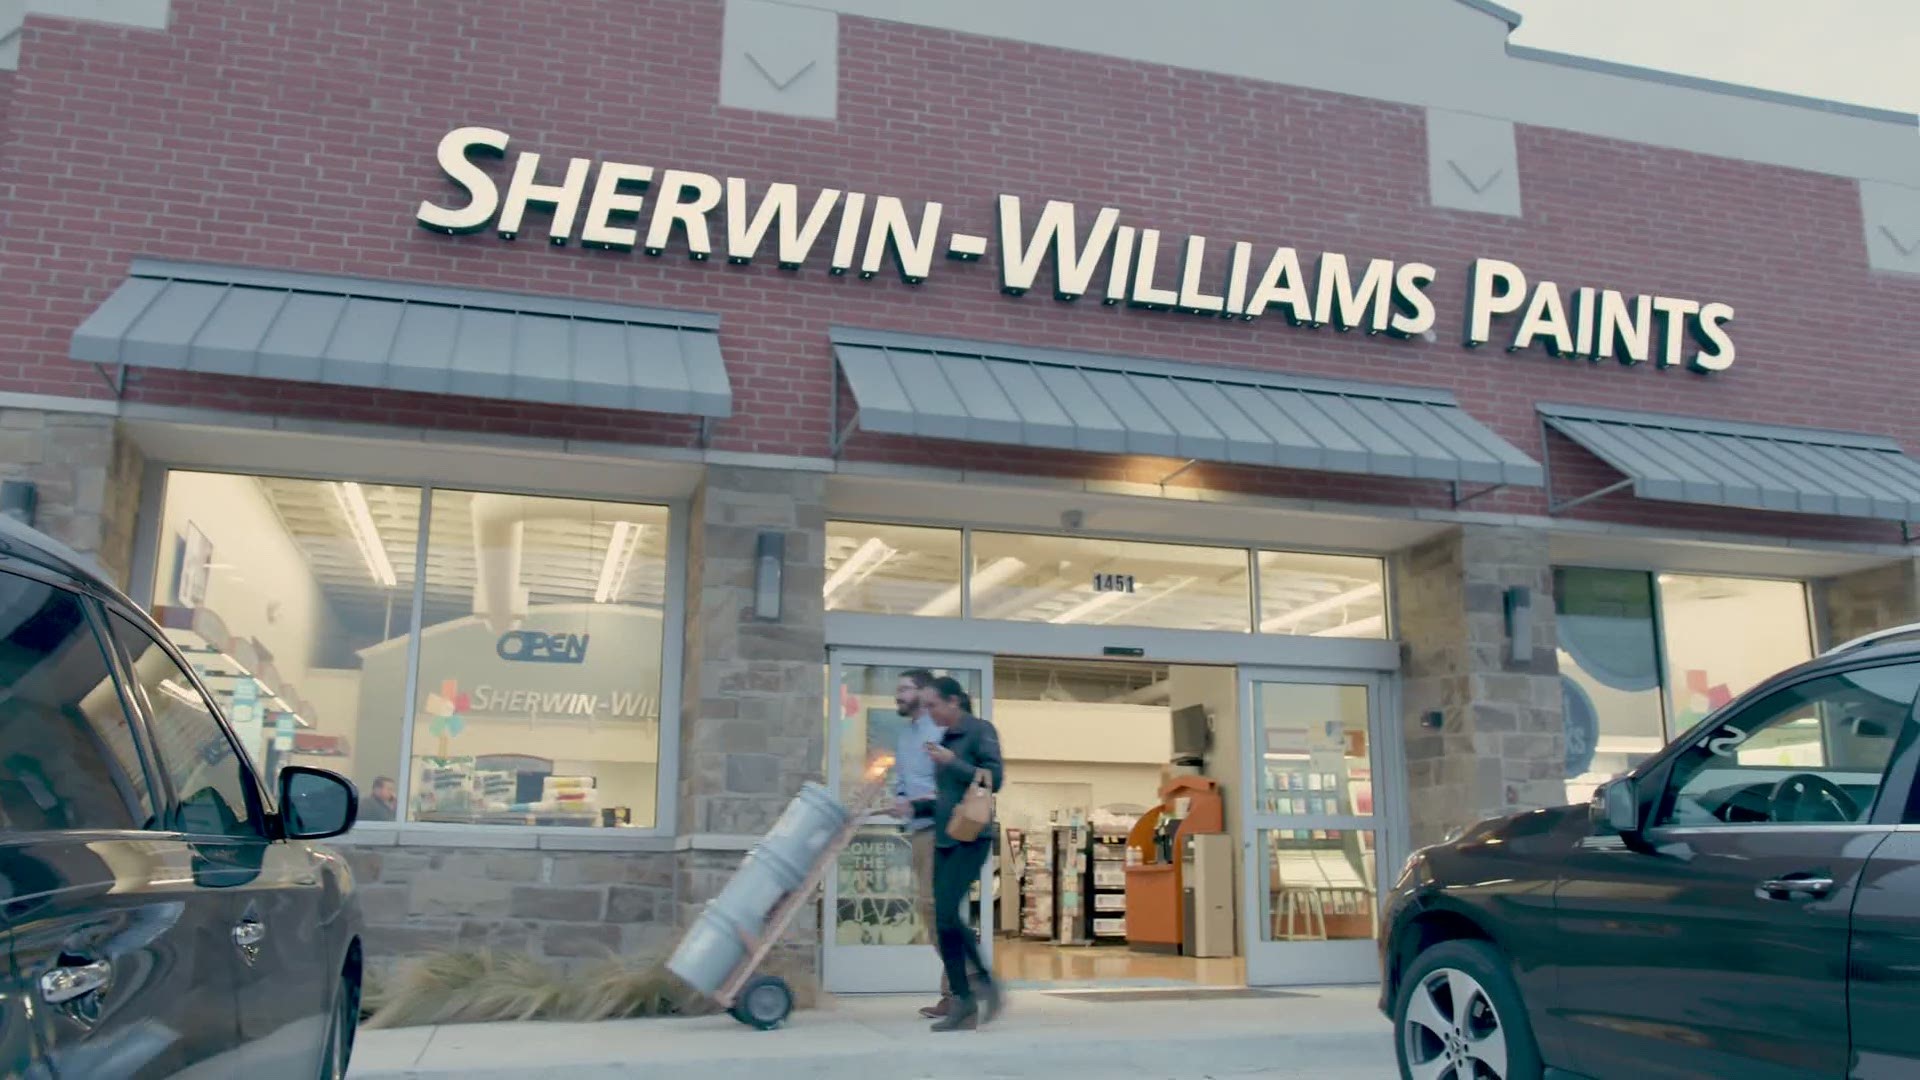 Feb. 6, 2020: This video released by Sherwin-Williams focuses on the company staying in Cleveland after announcing plans to build their new headquarters downtown.